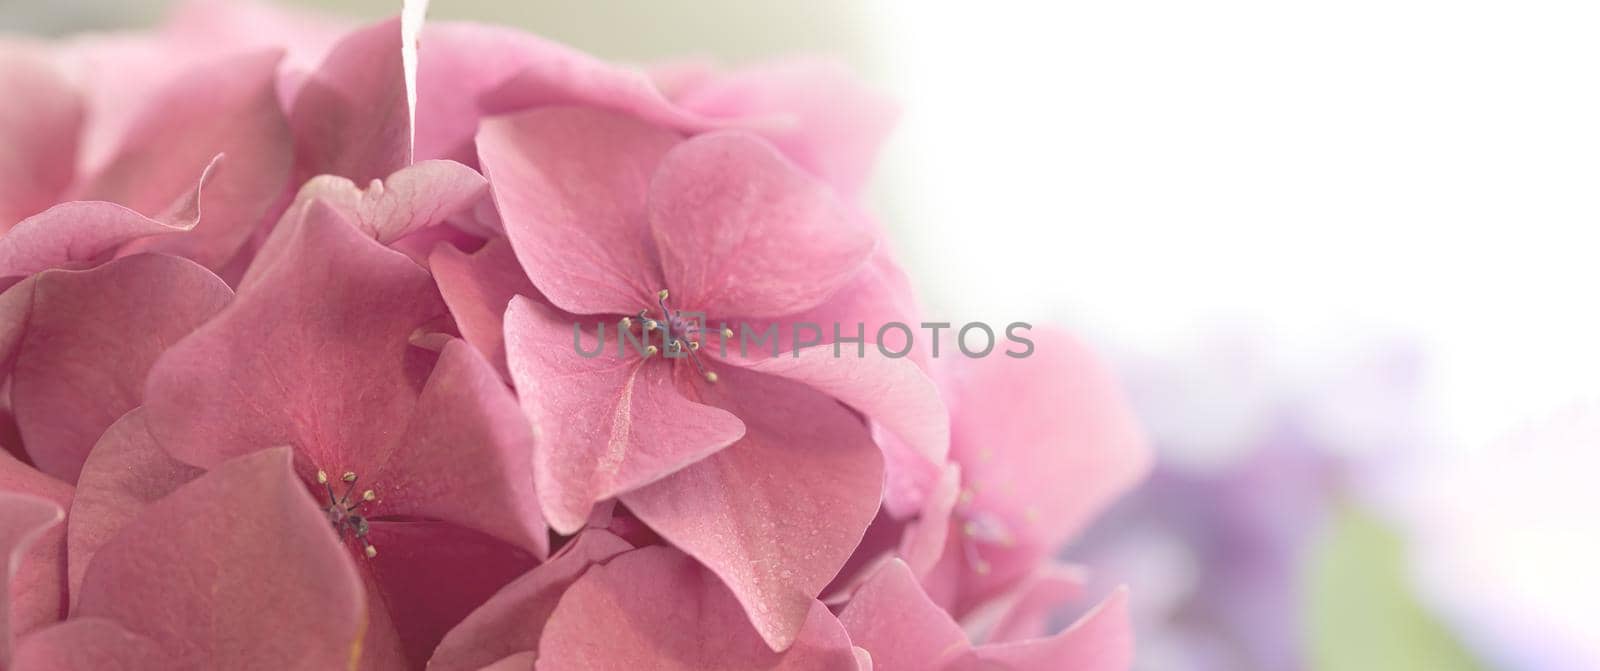 Floral background. Soft Hydrangea or Hortensia flowers. Artistic natural background. Flowers in bloom in spring time. 